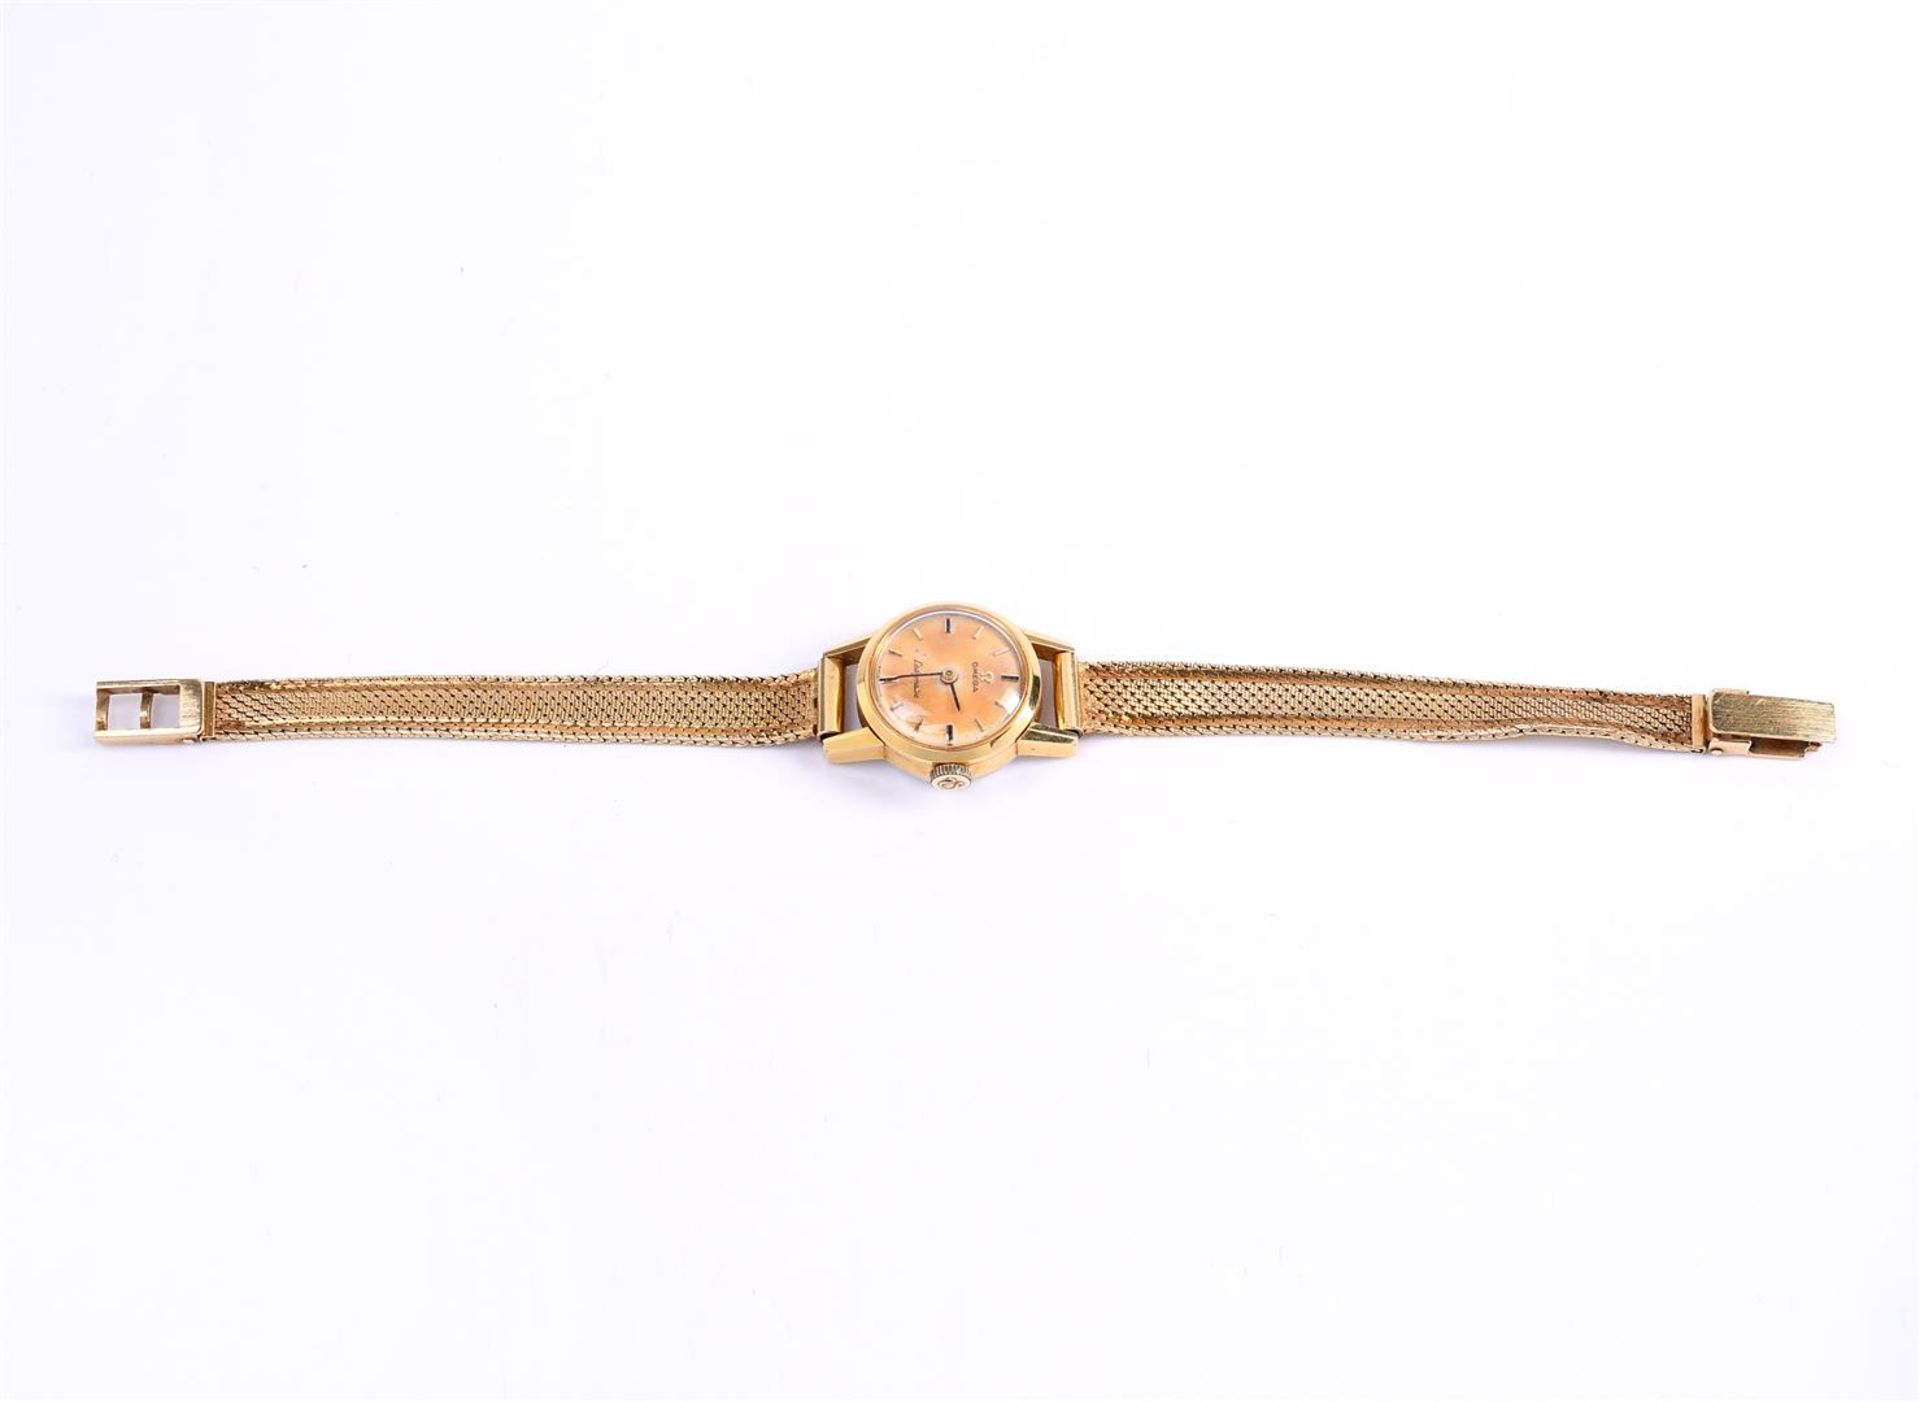 14 kt yellow gold Omega wind-up ladies watch with Milanese strap - Image 3 of 6